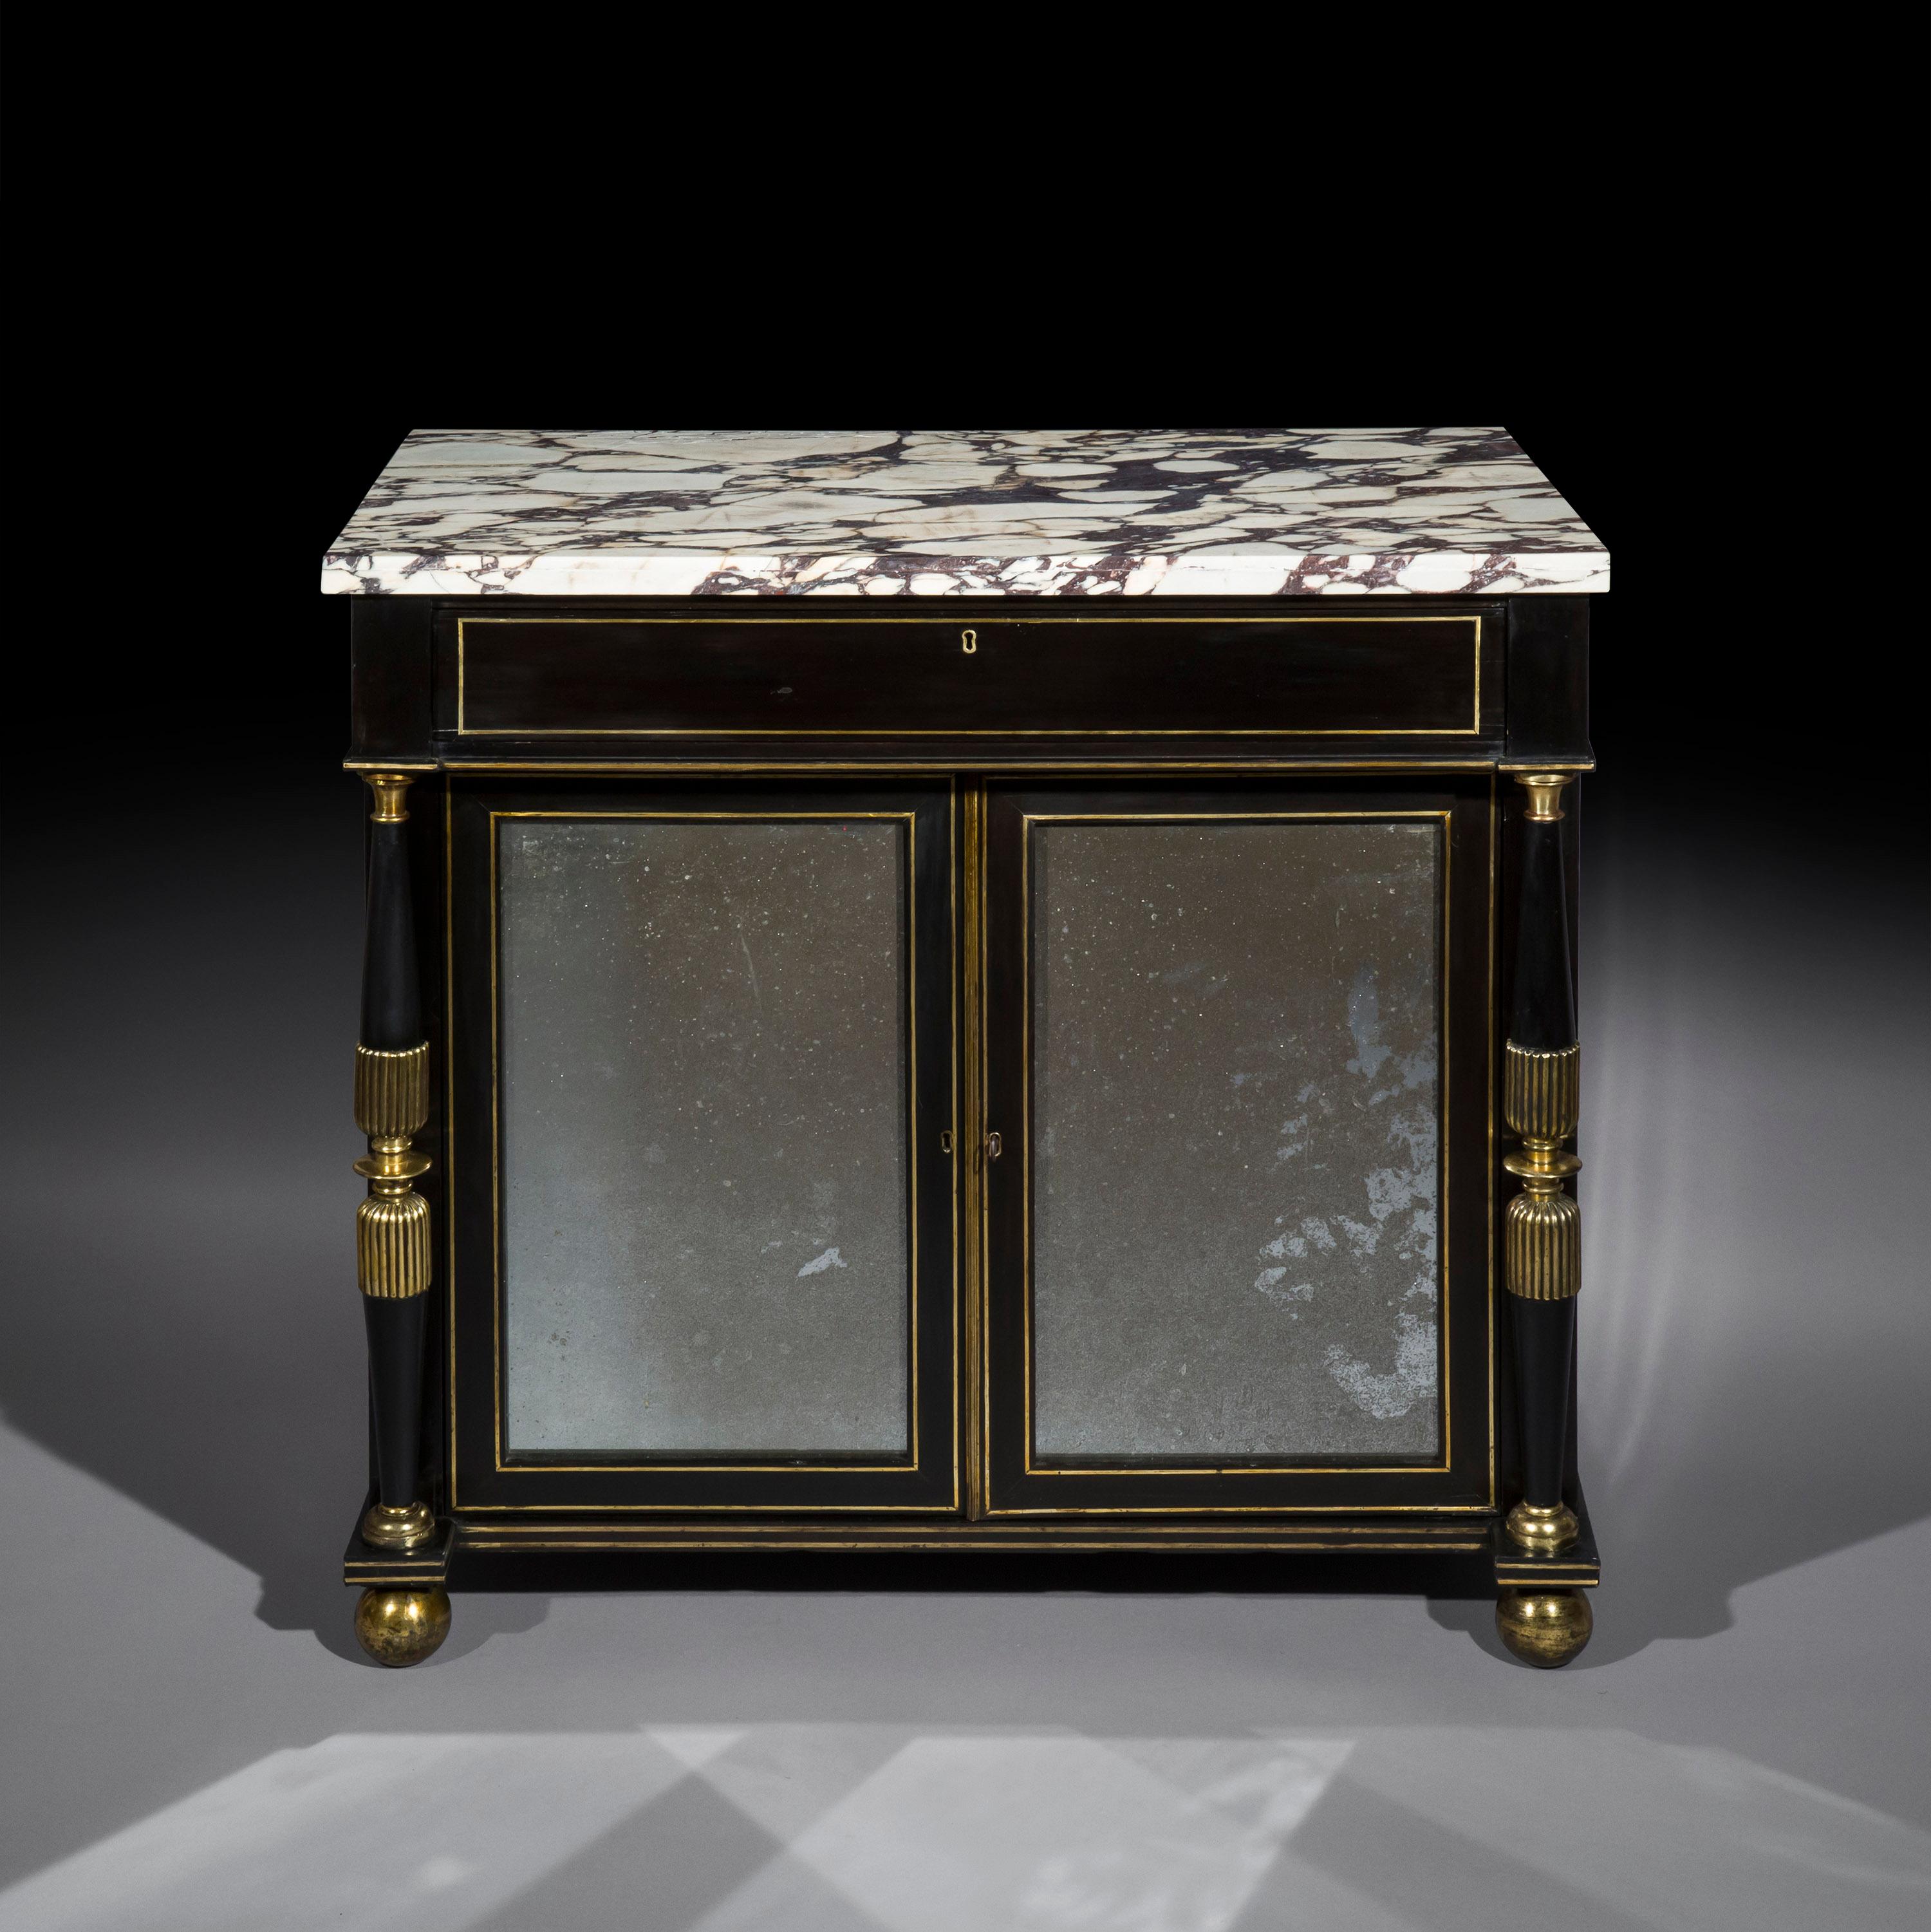 A very decorative Regency period ebonised, brass inlaid and ormolu-mounted cabinet, with mirrored doors and Calacatta viola marble top, in the manner of James Newton.
English, c. 1815

Why we like it
One of the most elegant designs from the early